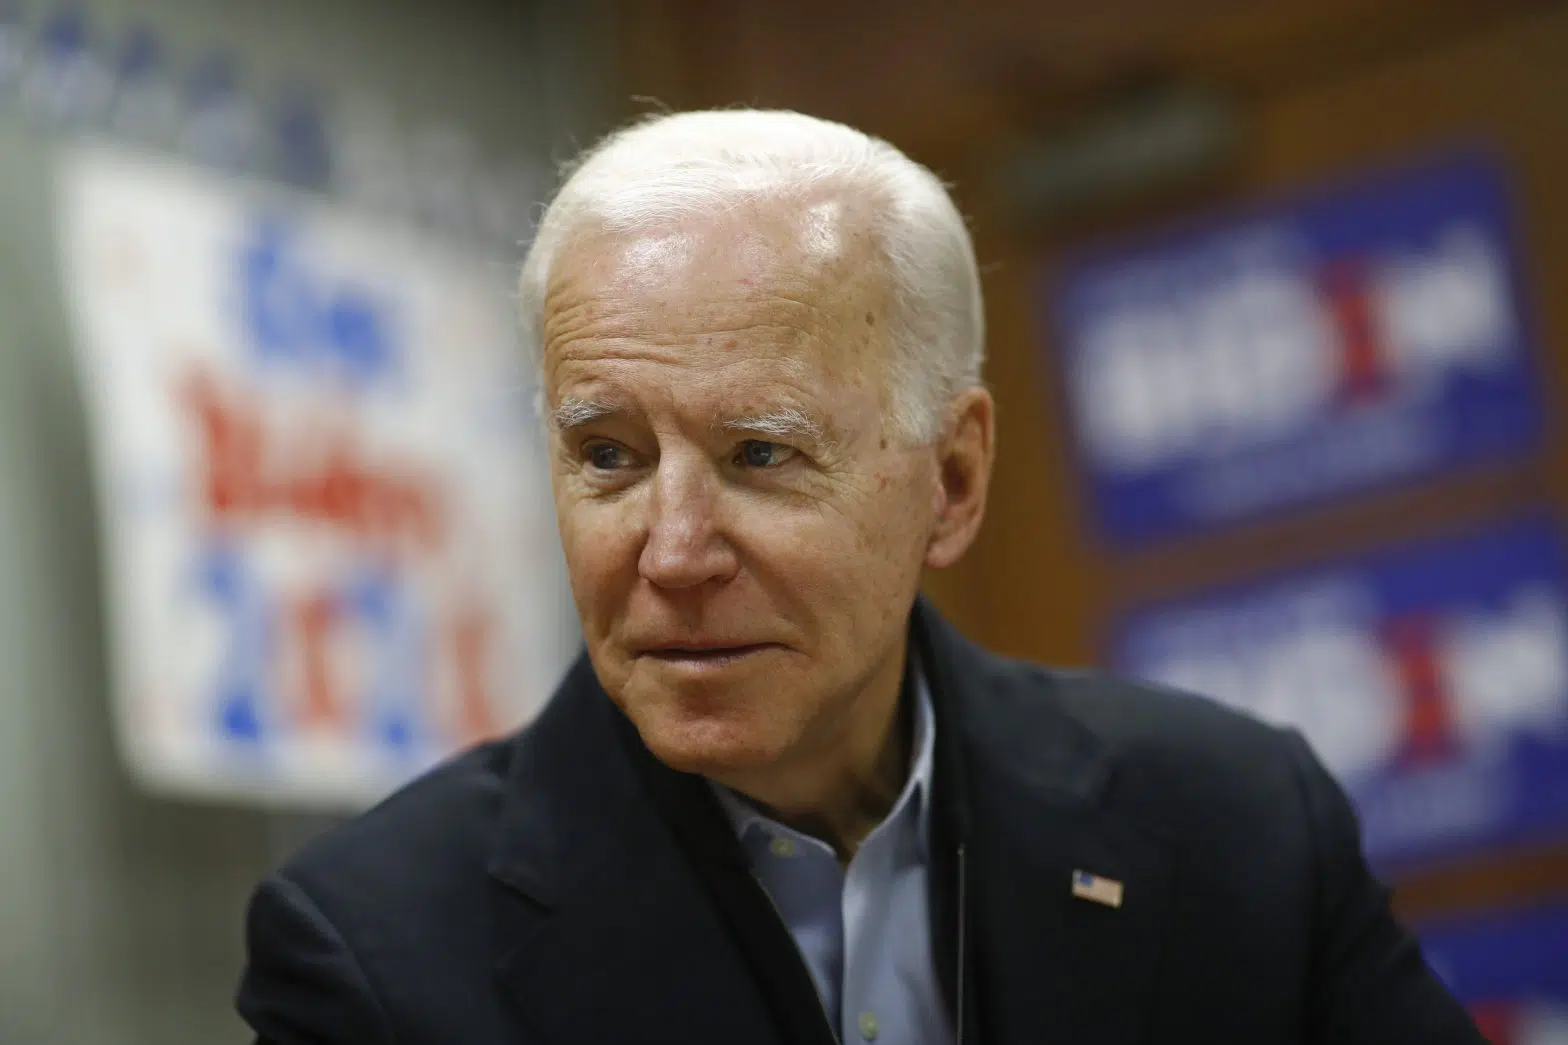 New Poll Finds Biden Widening Lead Over Other Dems in Florida